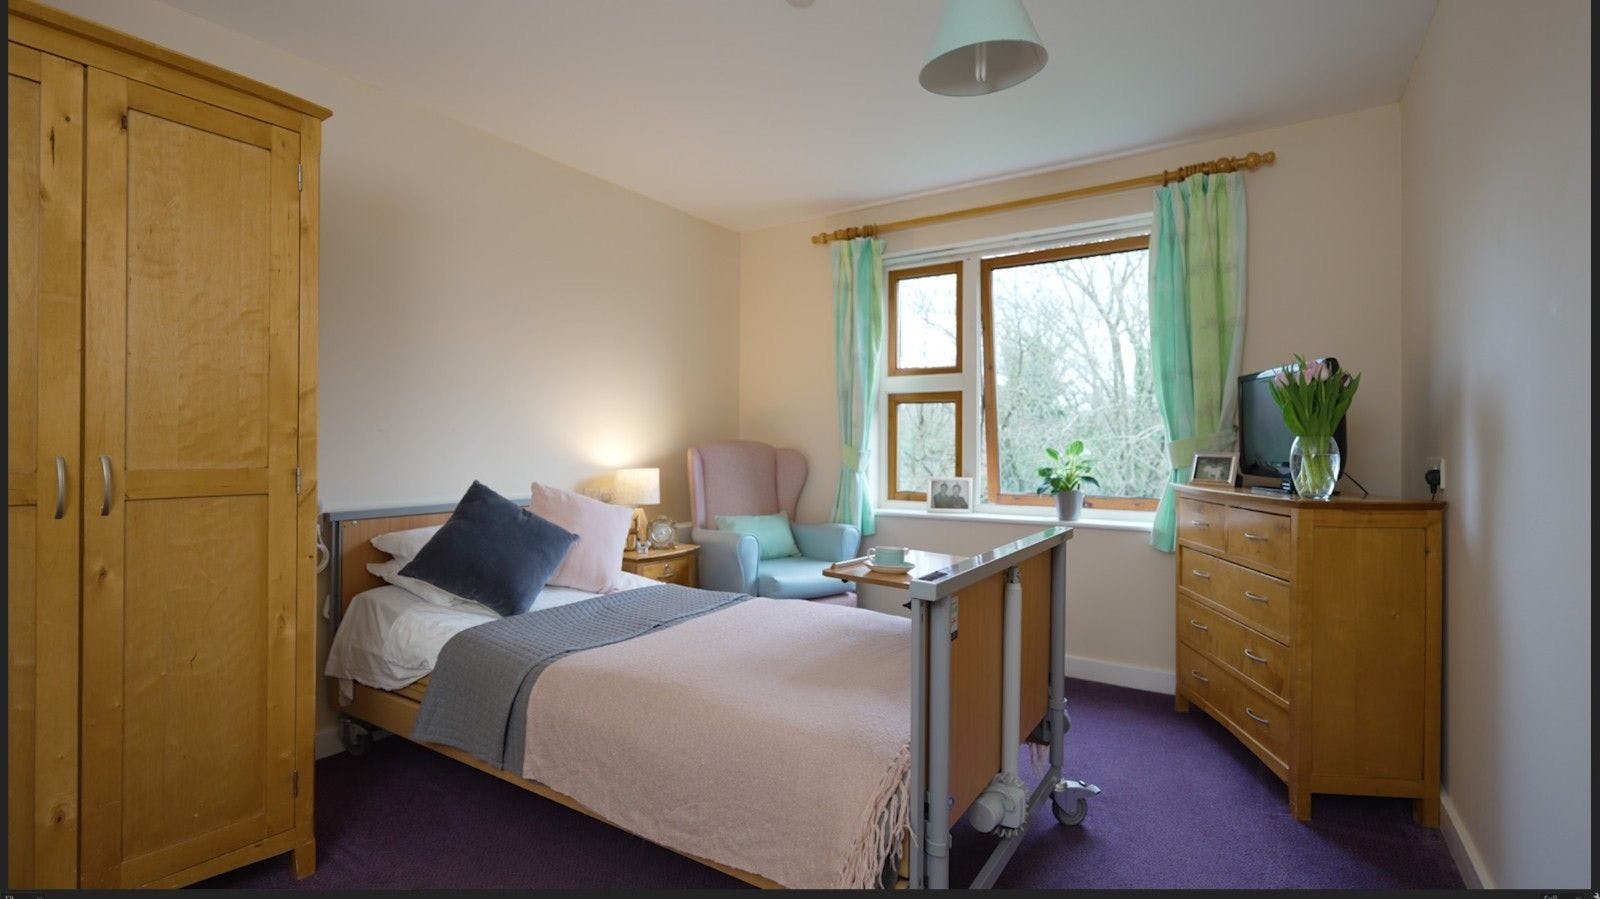 Shaw Healthcare - Mill River Lodge care home 001